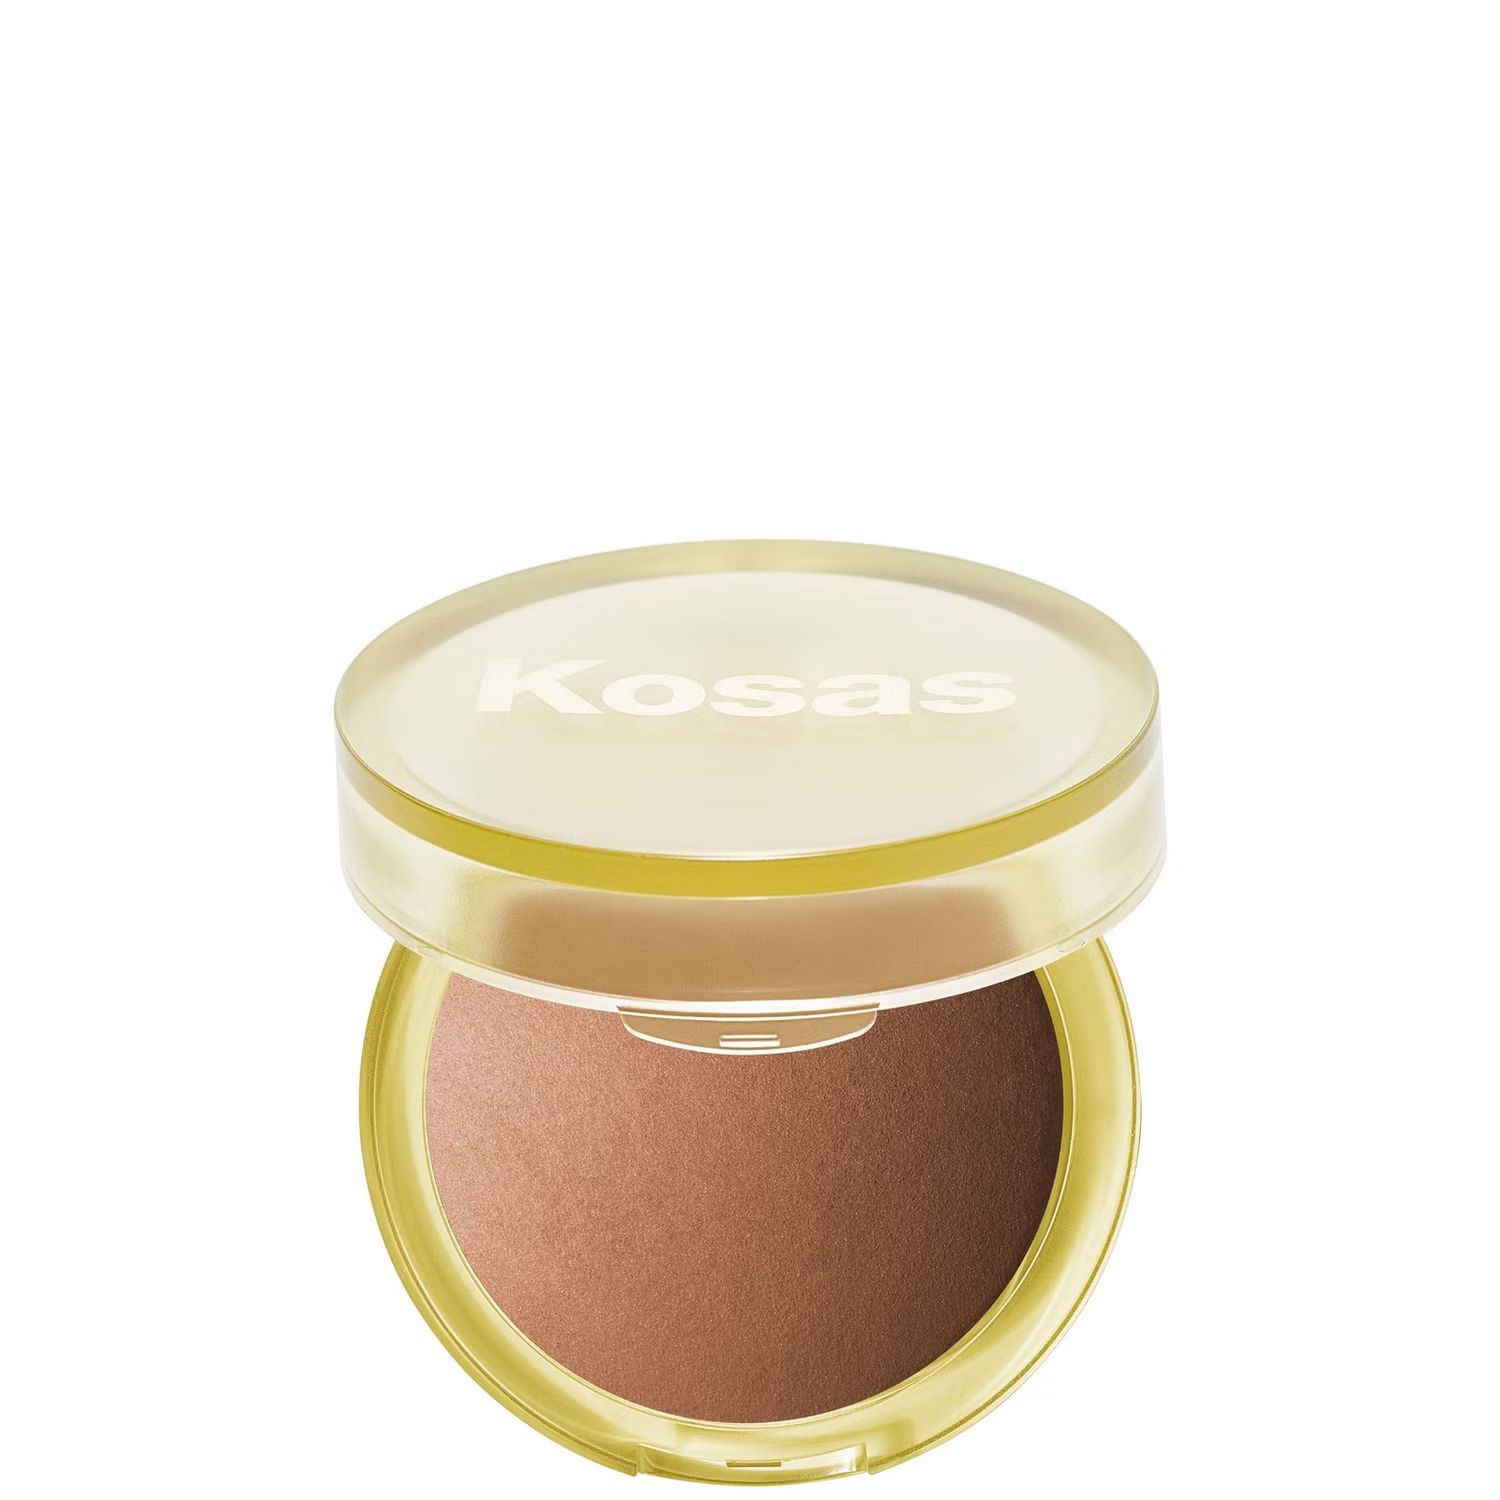 Kosas The Sun Show Glowy Warmth Talc-Free Baked Bronzer 6g (Various Shades) | Cult Beauty